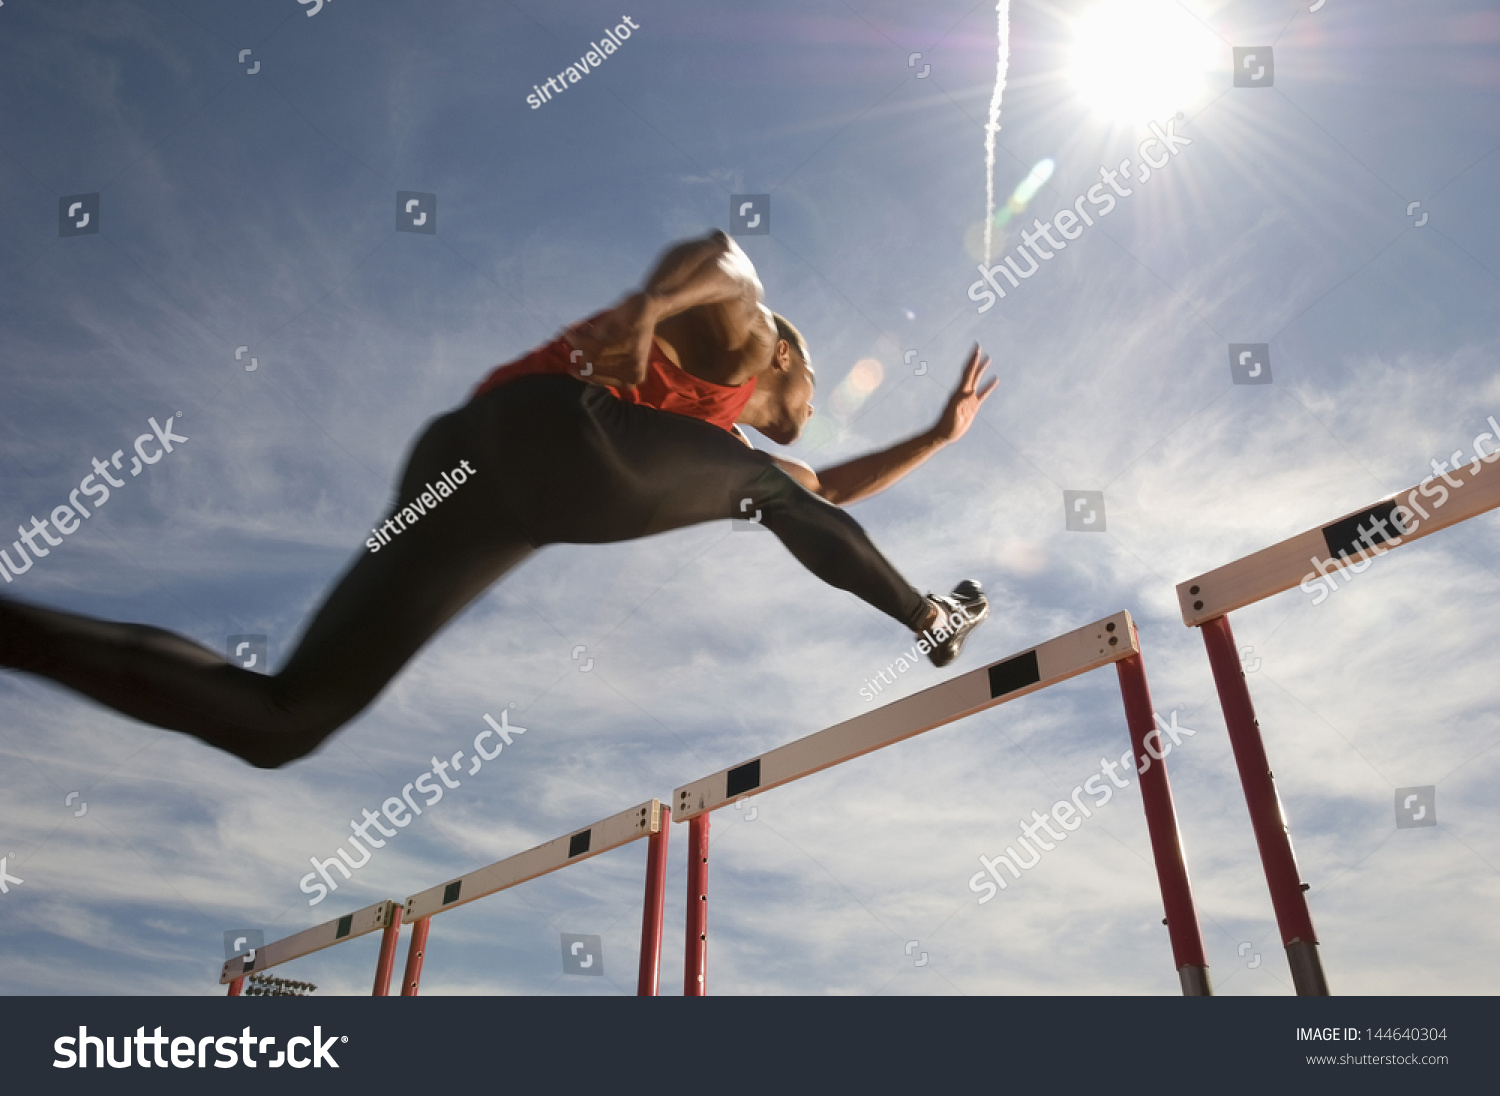 Low angle view of a male athlete jumping hurdle against the sky #144640304